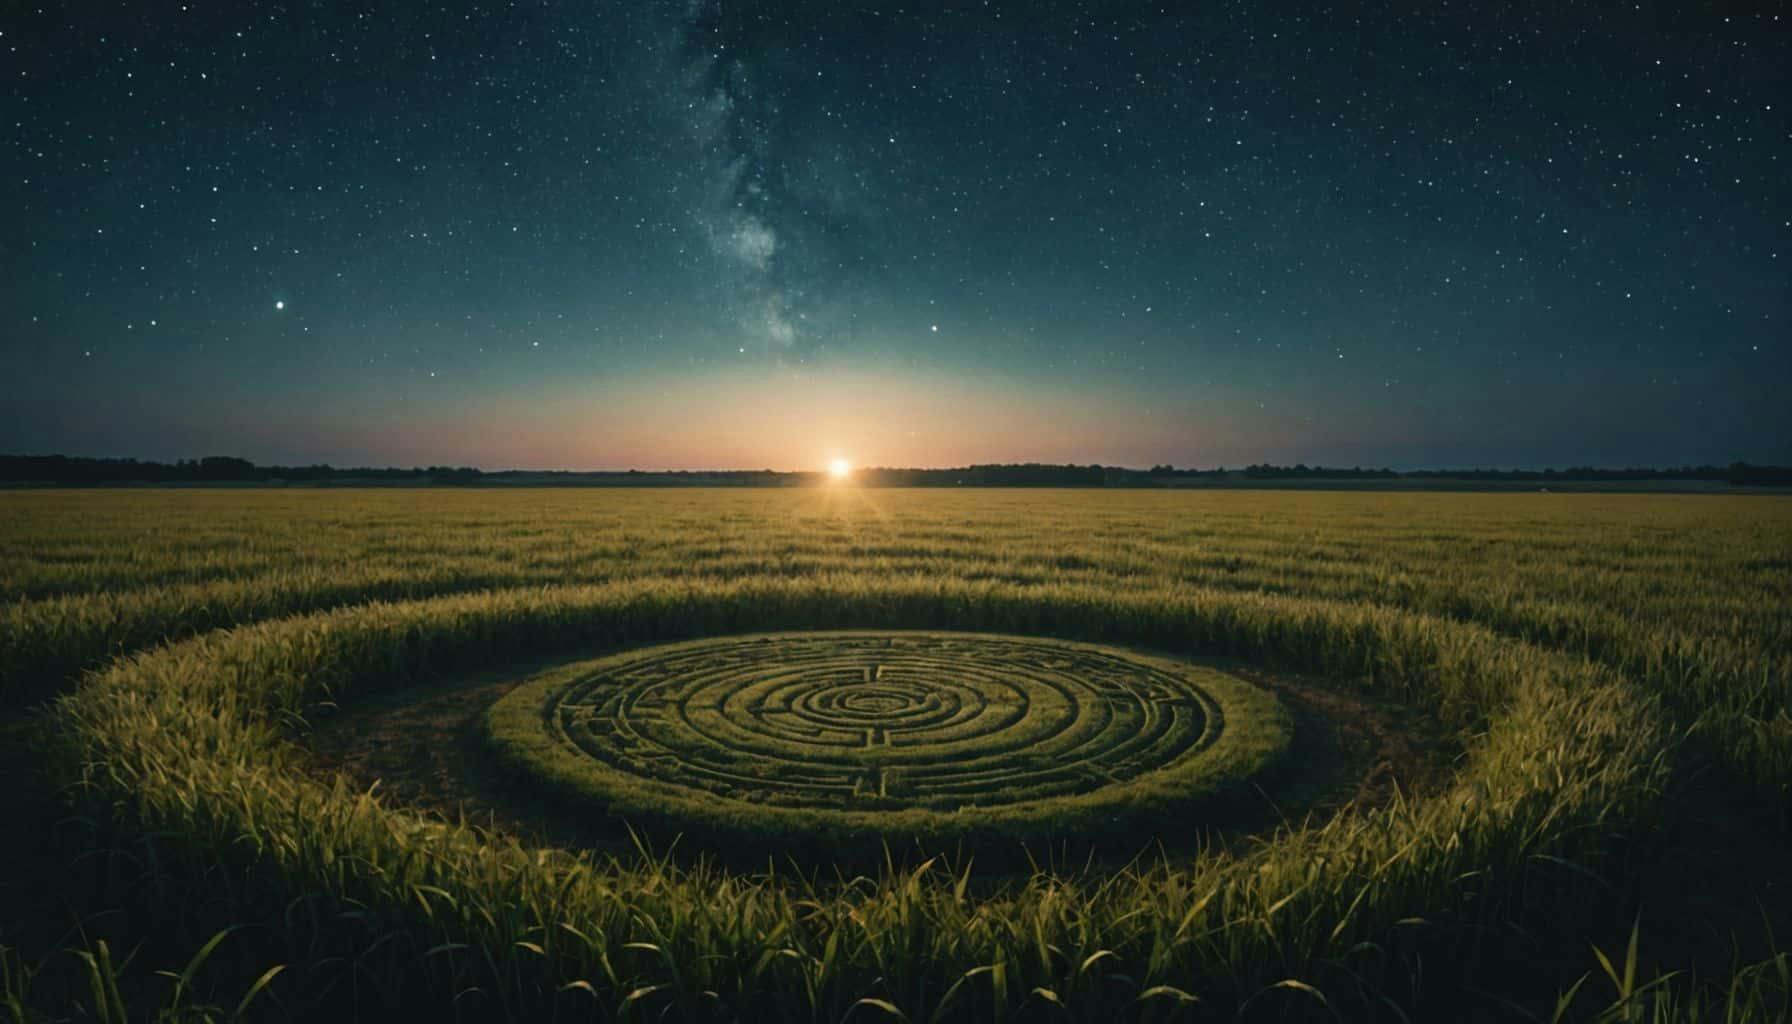 Crop Circles: Are They Messages from Beyond?